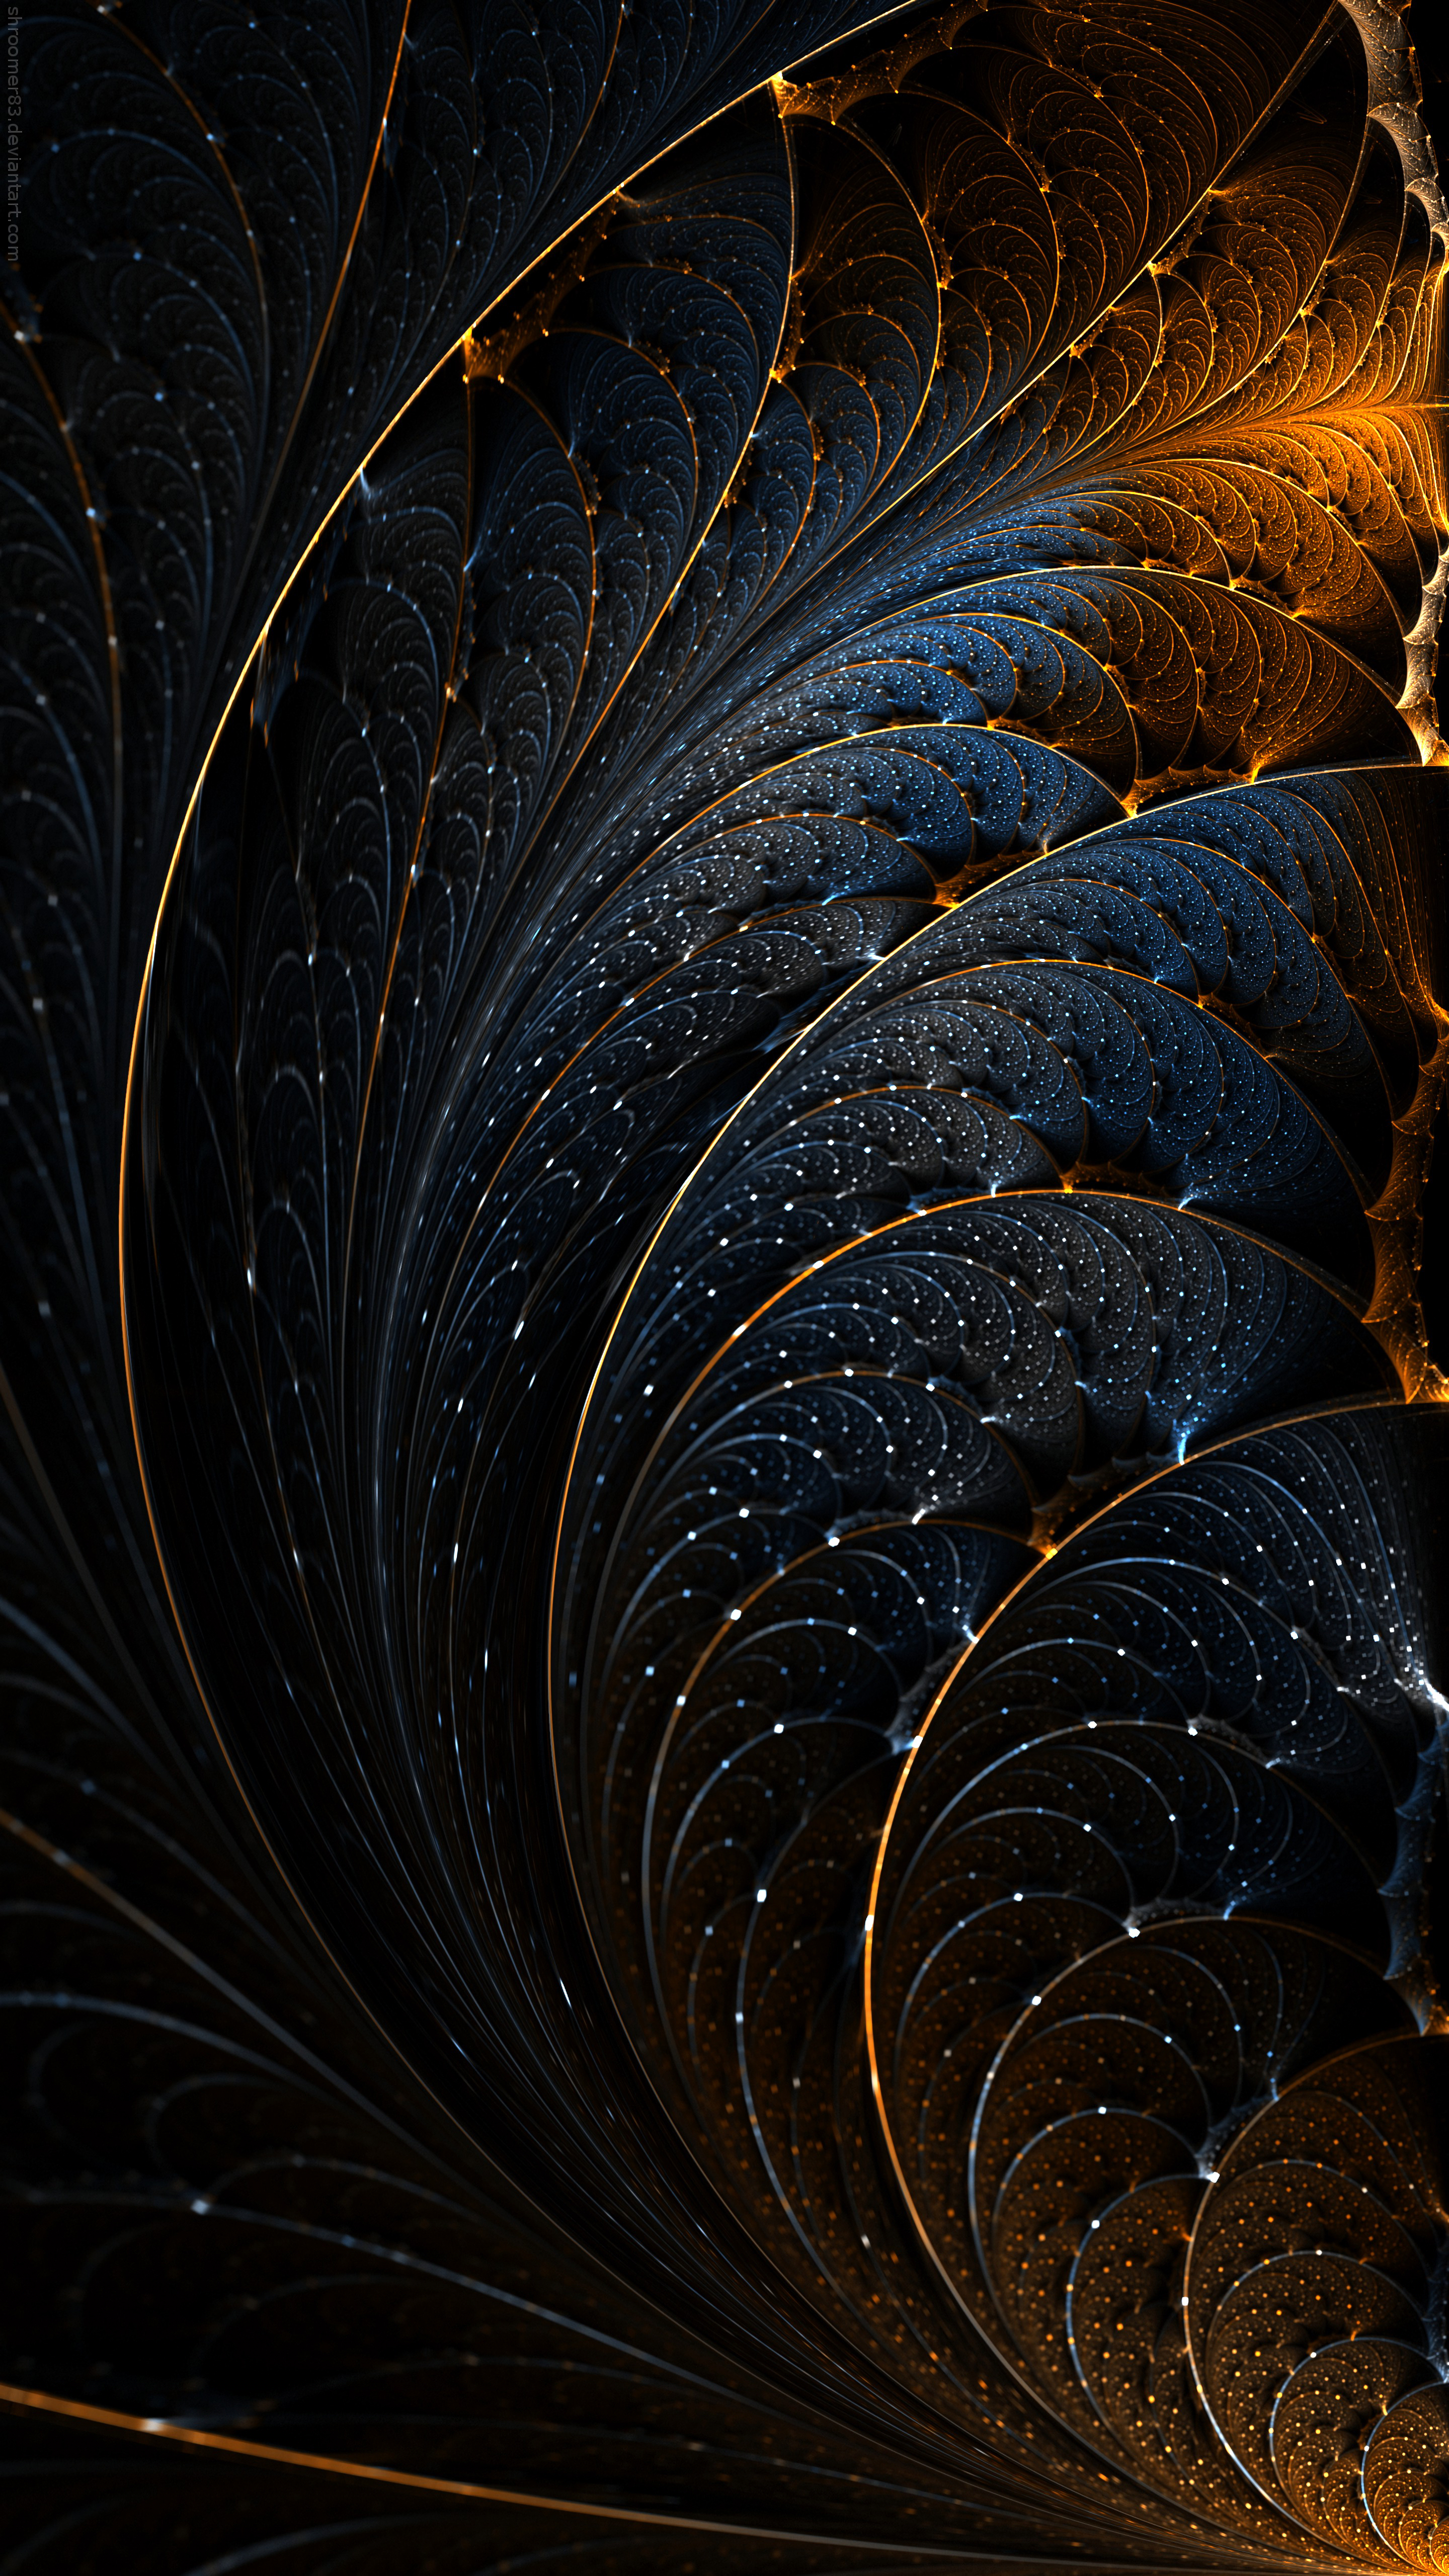 Mobile wallpaper: Golden, Abstract, Dark, Brilliance, Fractal, Shine,  Structure, 88179 download the picture for free.